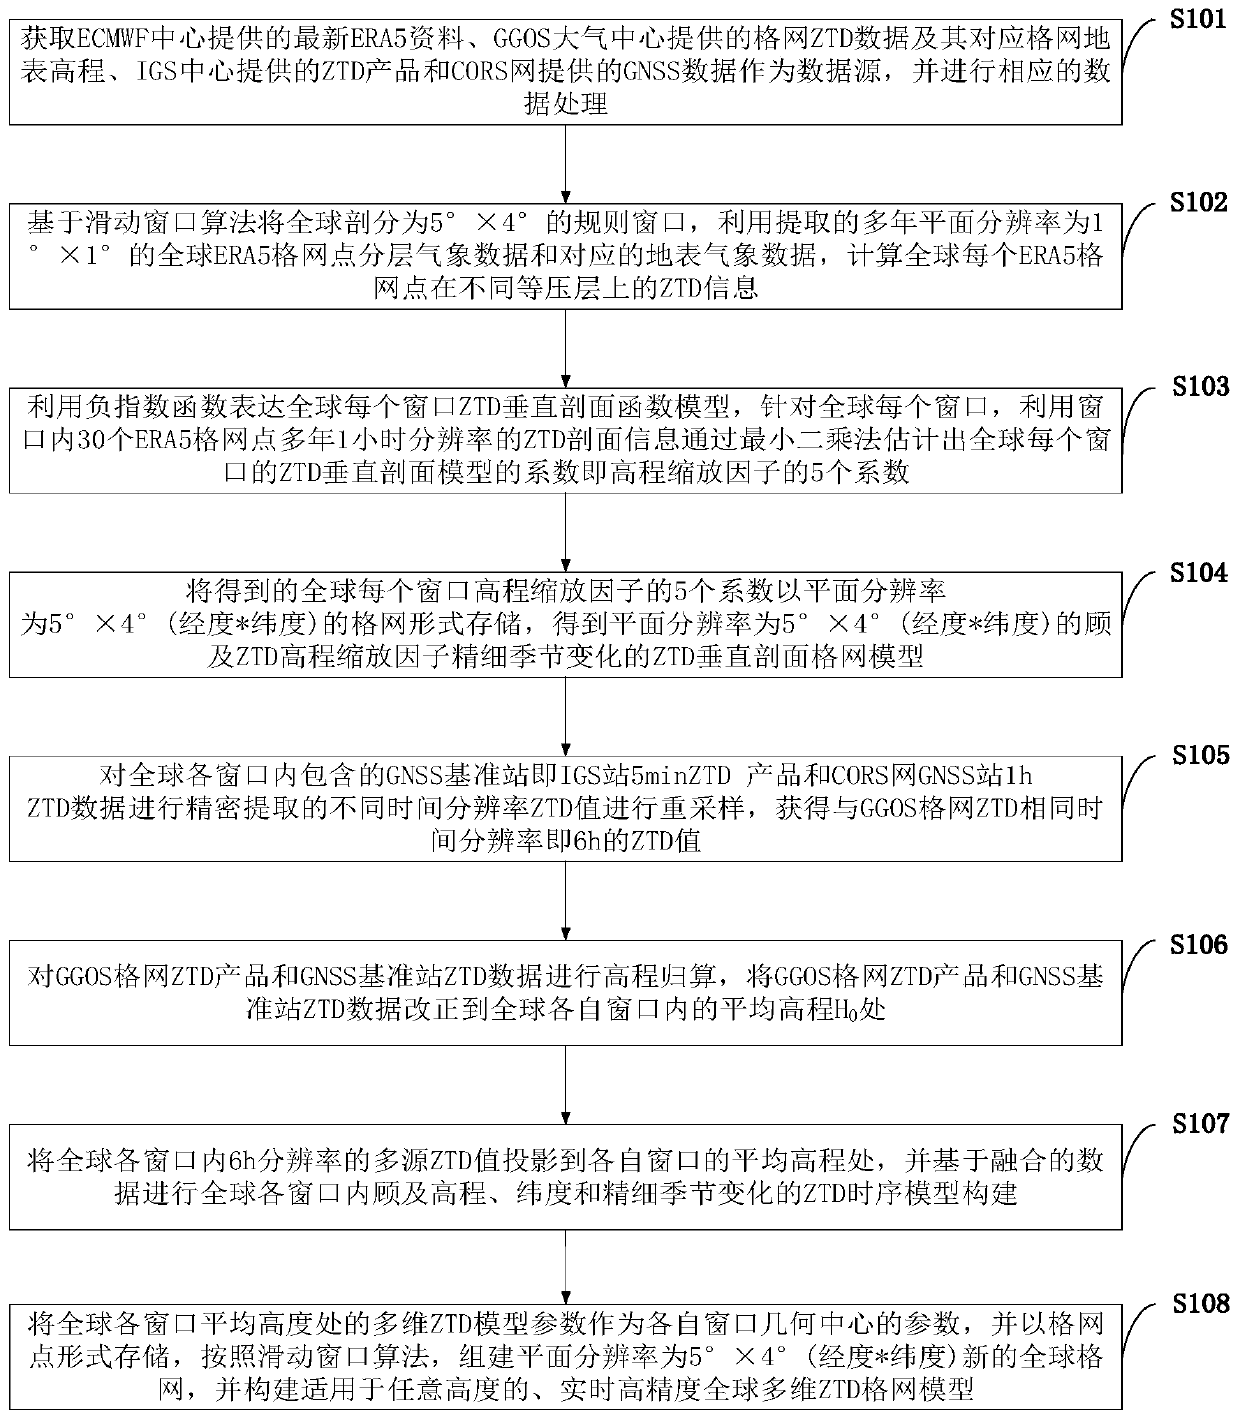 Real-time high-precision global multi-dimensional troposphere zenith delay grid model construction method